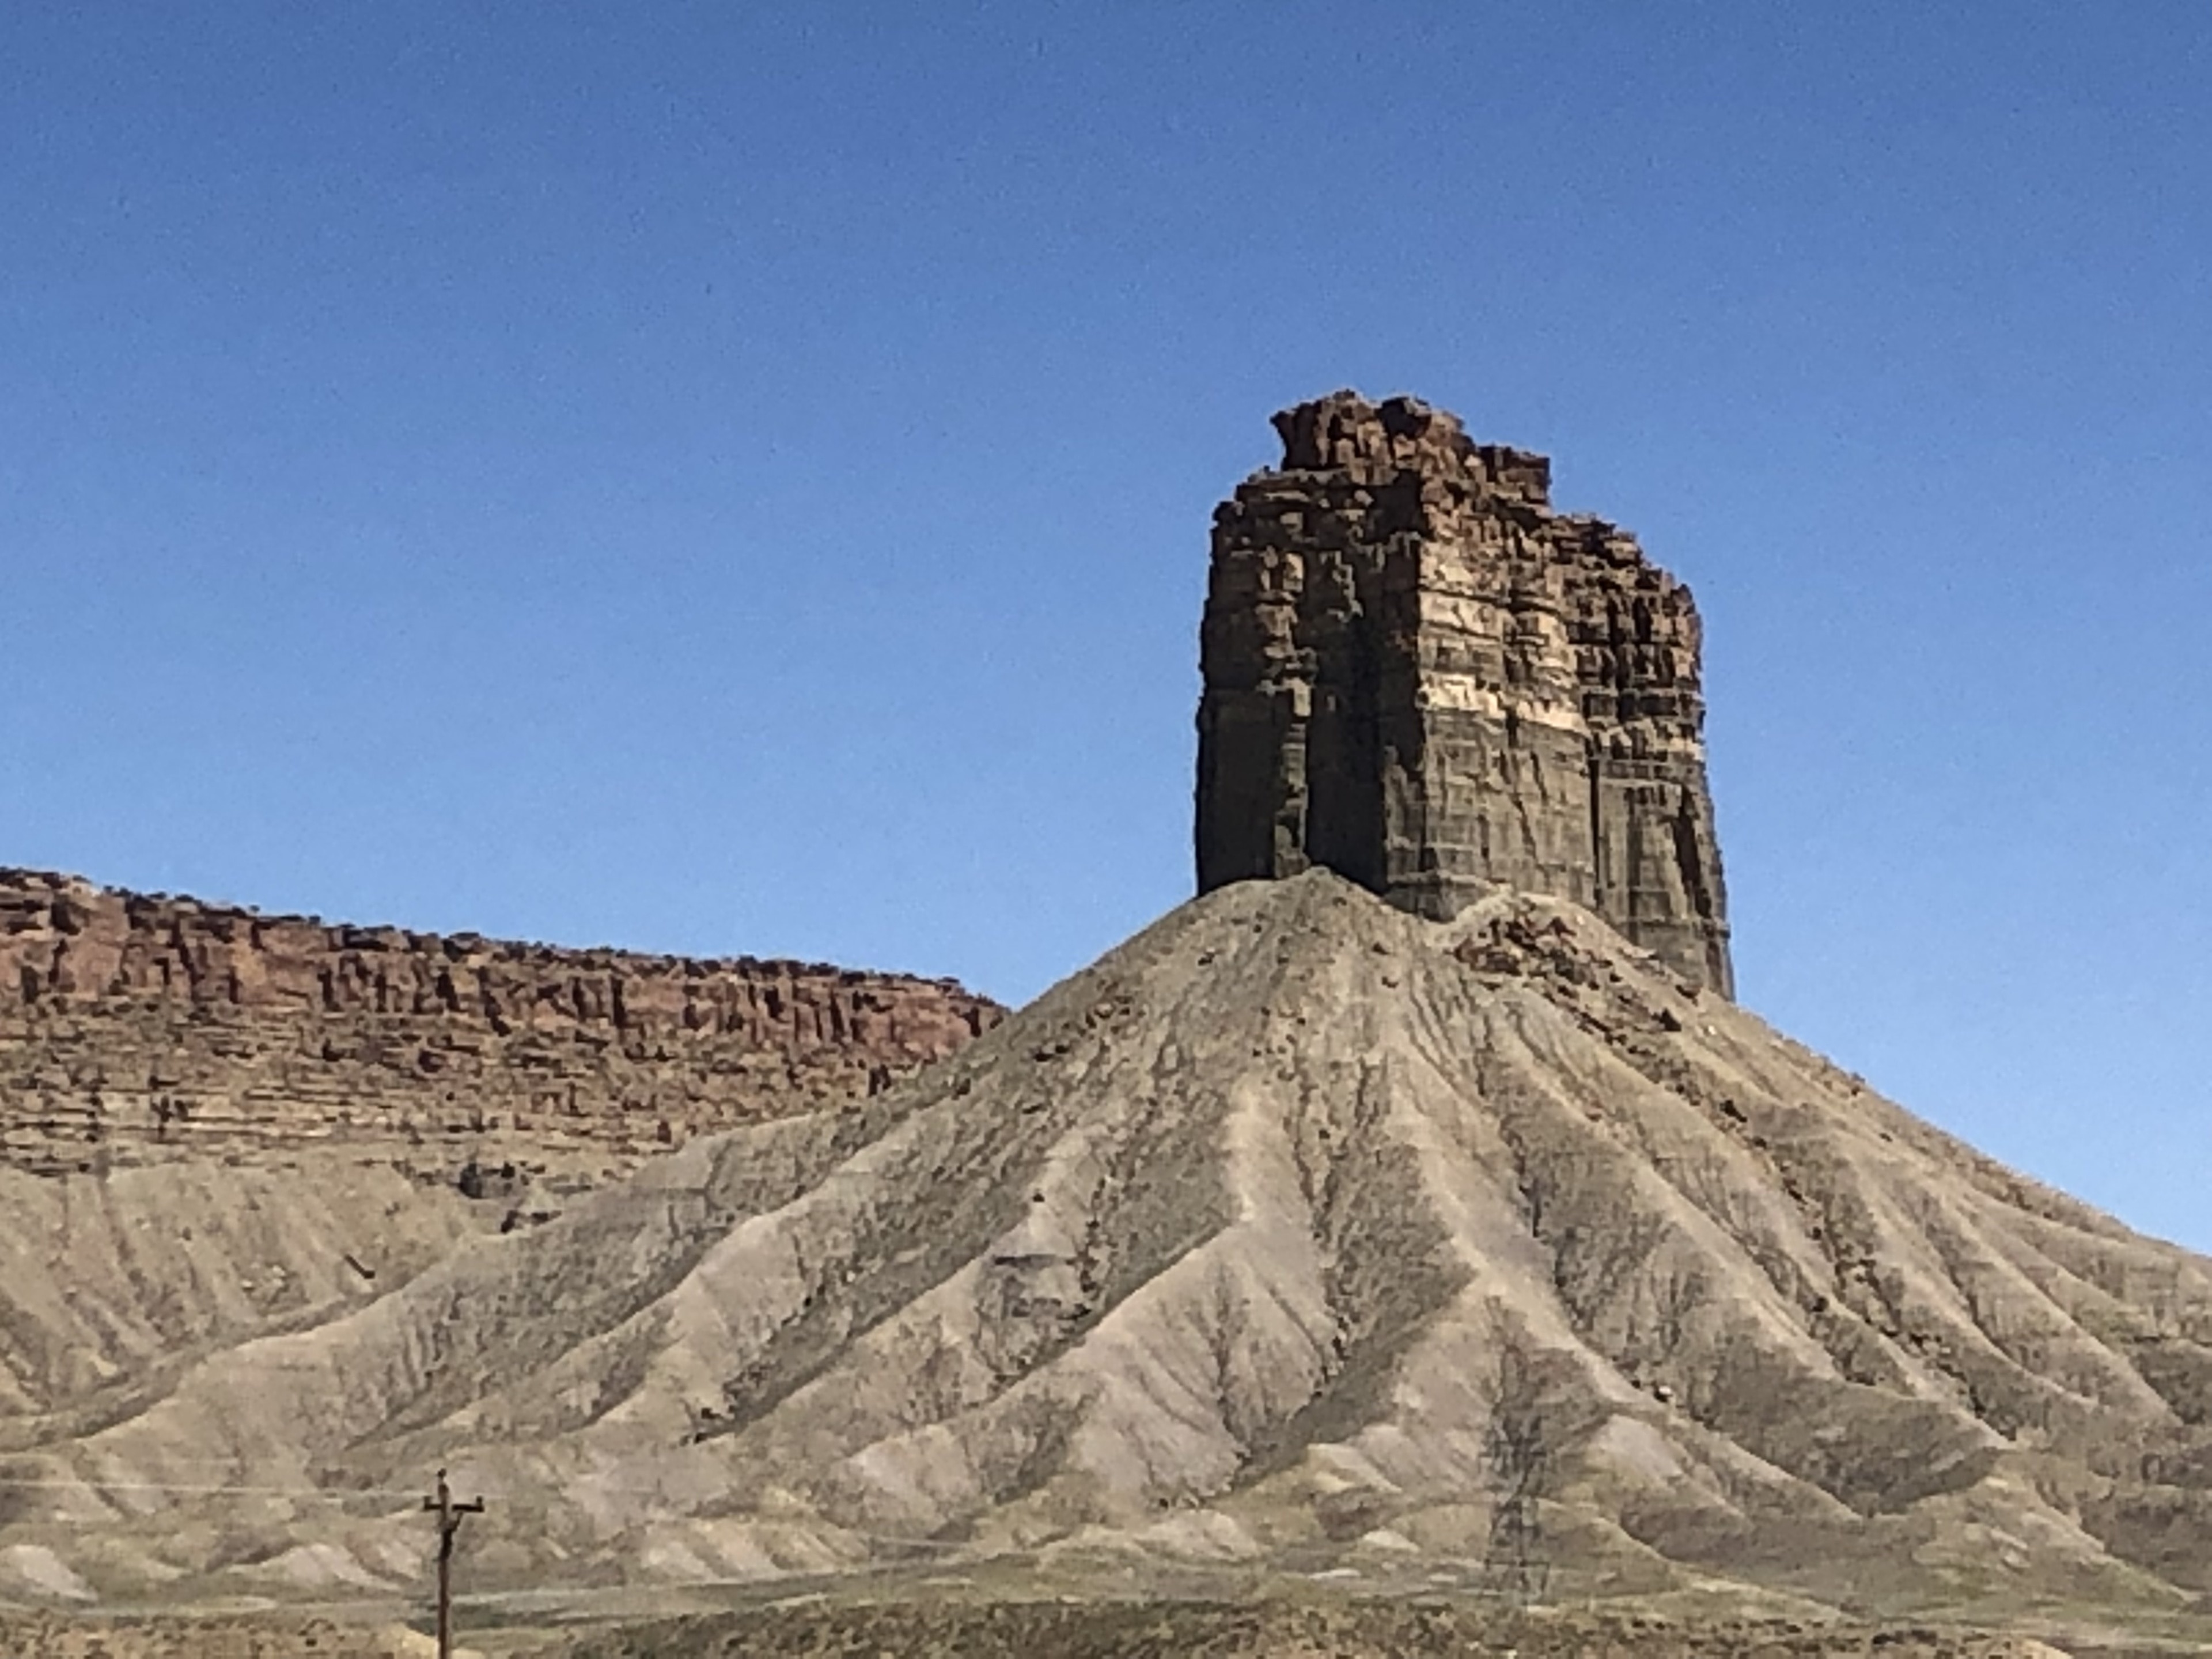 On our way to the Four Corners(CO, NM, AZ, UT) 
we stopped to take a photo of this butte that was about 250 feet tall. I could see it driving at least 25 miles ahead.